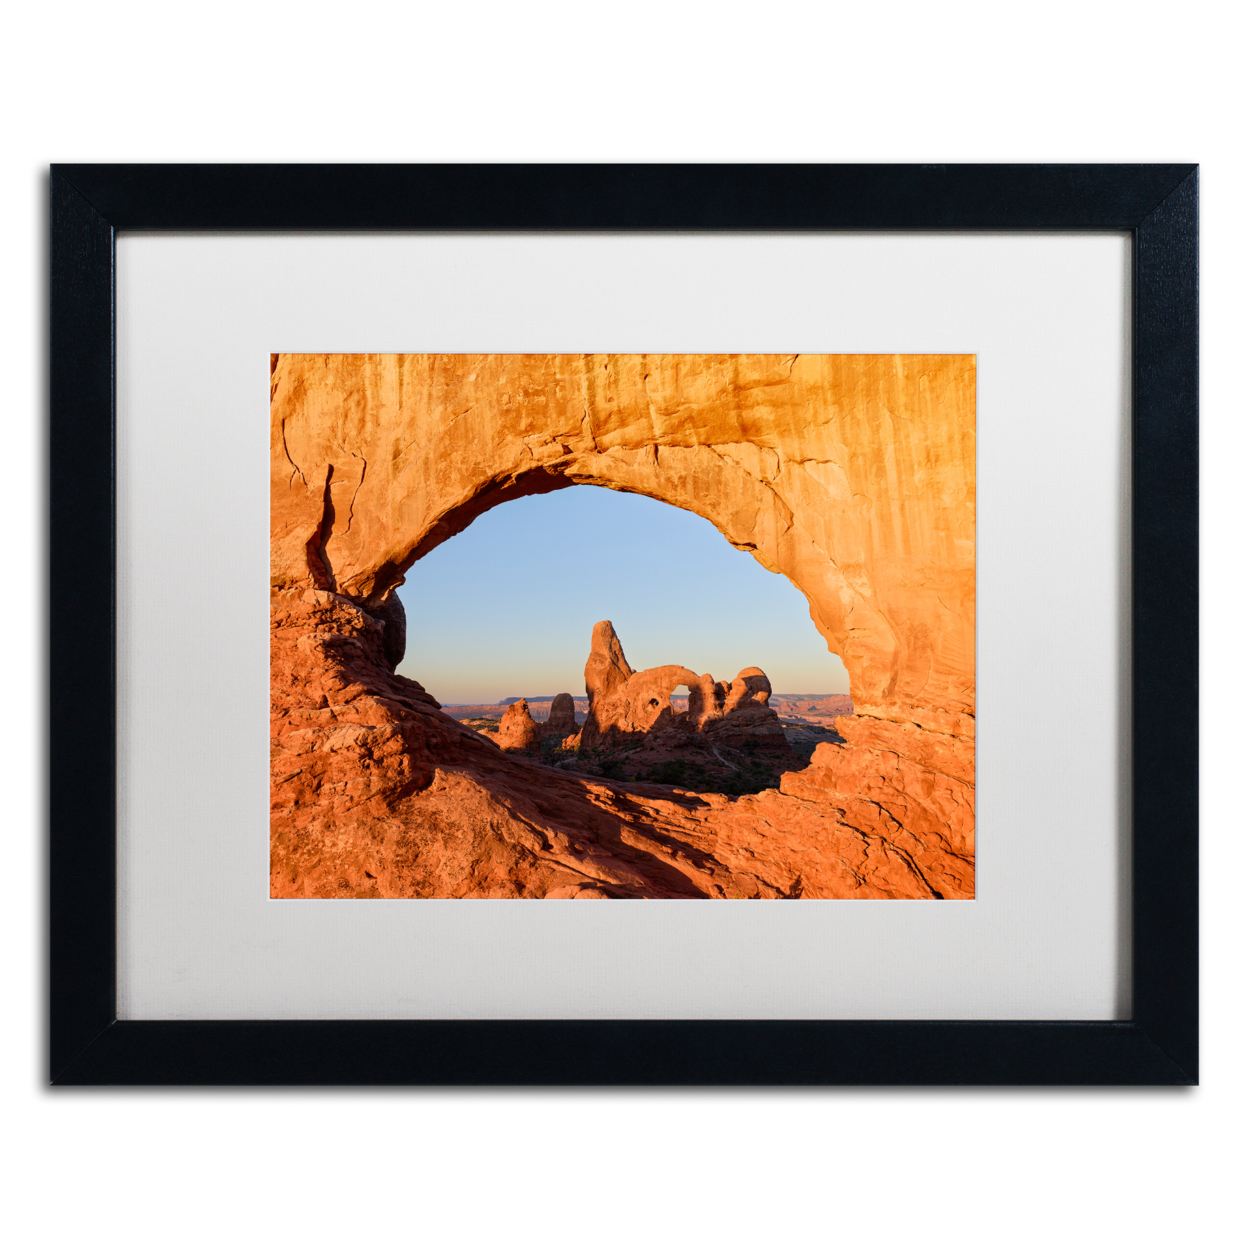 Michael Blanchette Photography 'Through The Arch' Black Wooden Framed Art 18 X 22 Inches